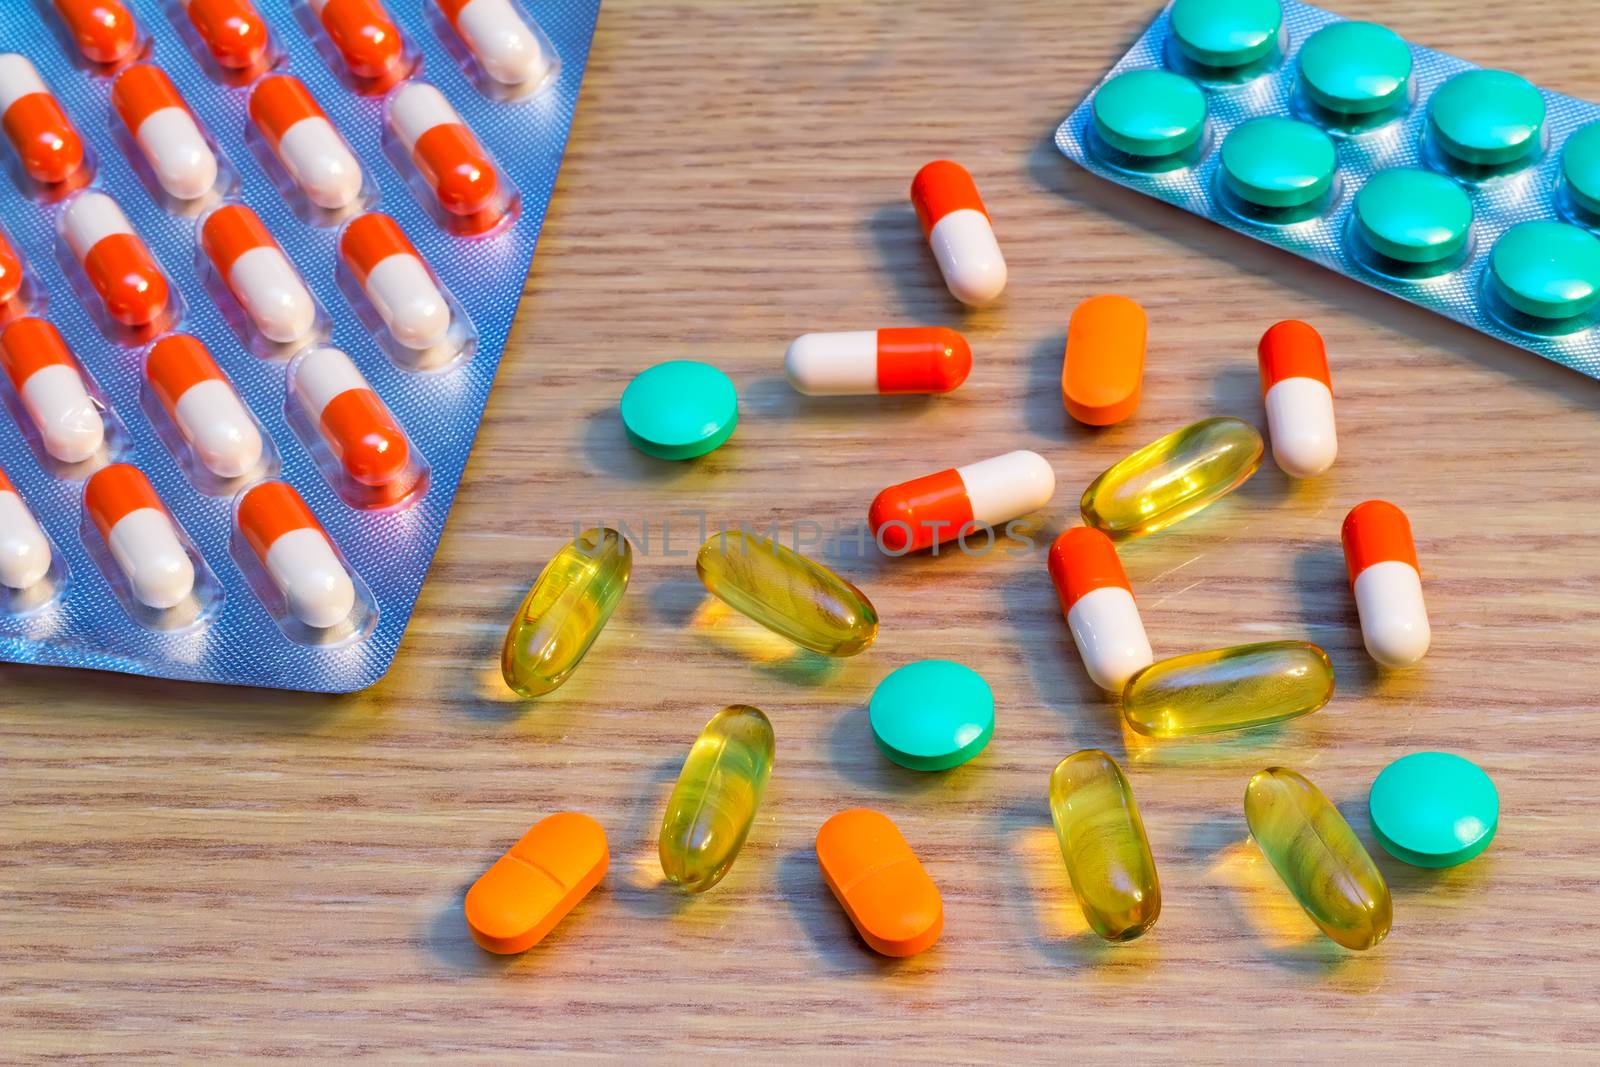 Medications for the treatment of various diseases: a variety of tablets and capsules.